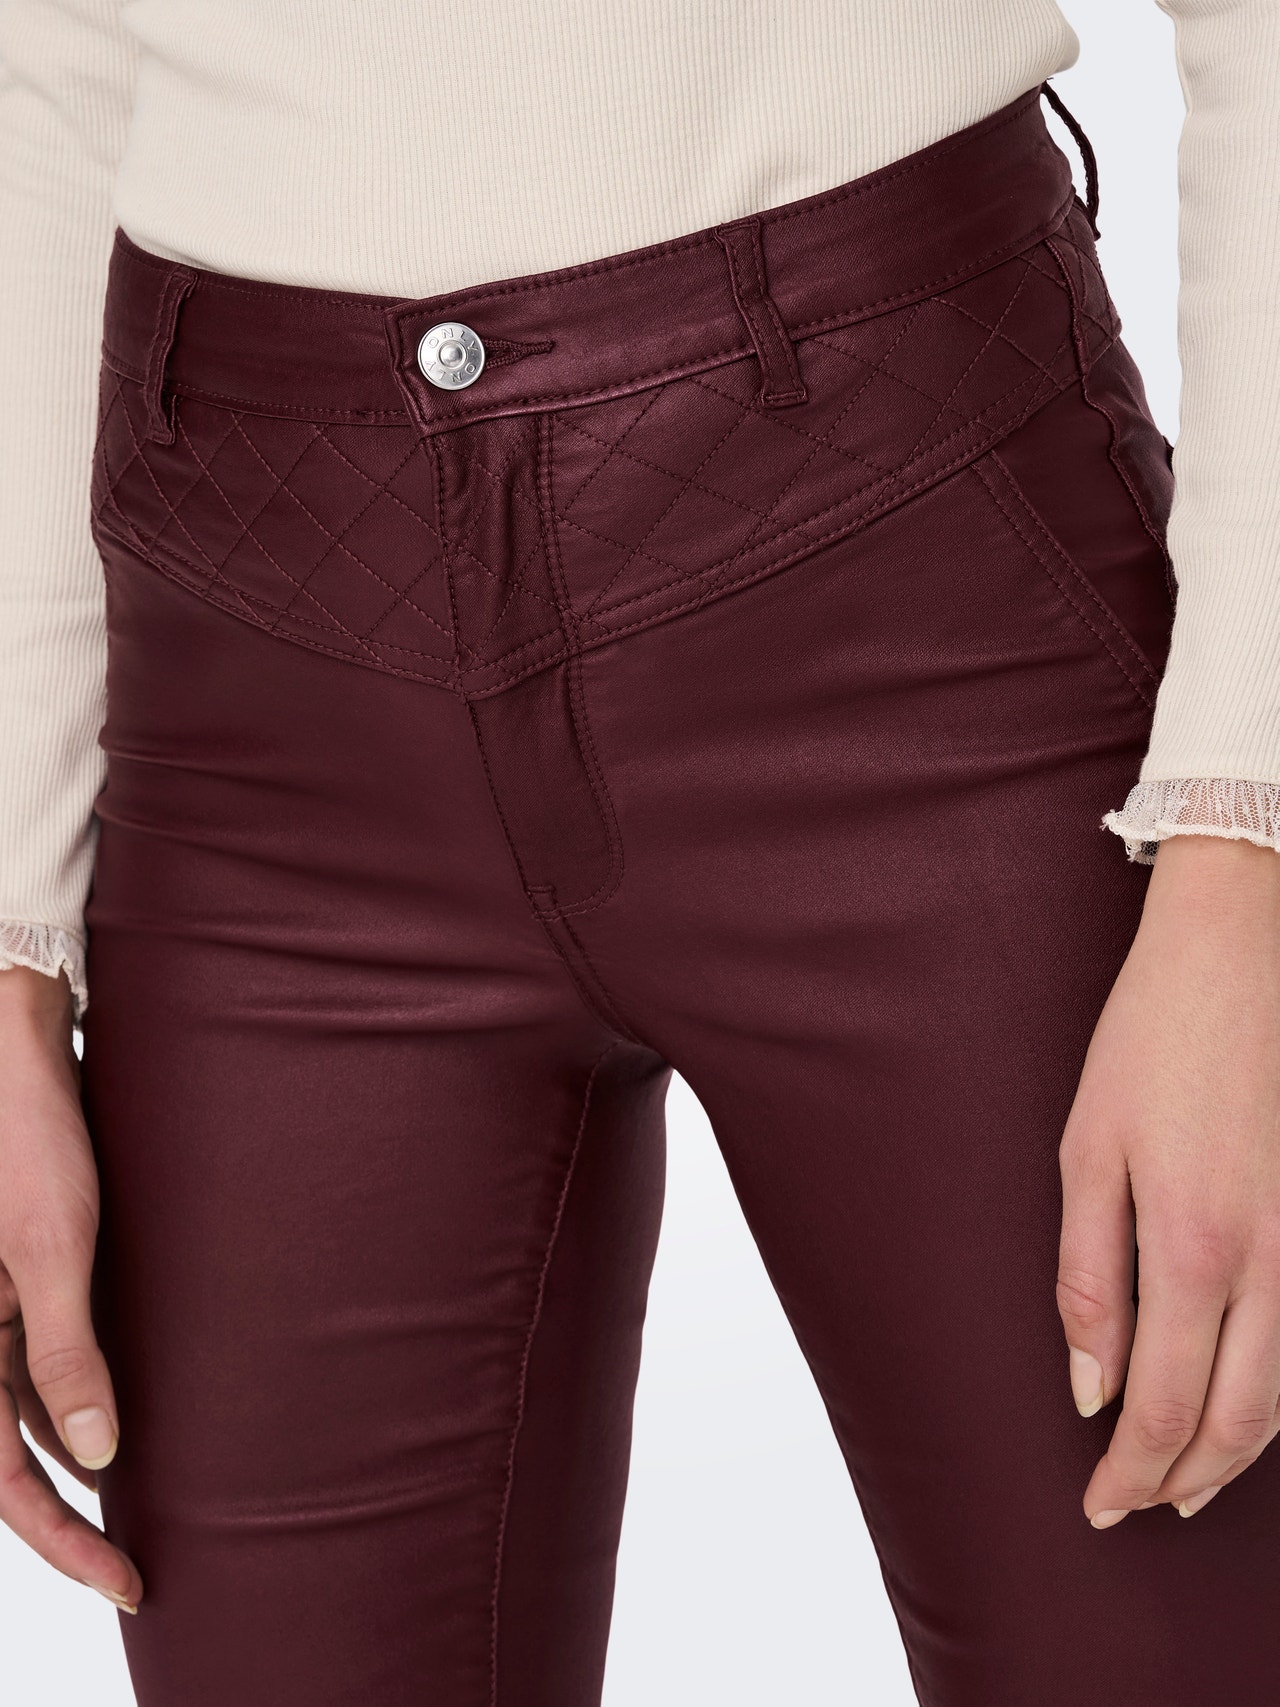 ONLY Flared Fit Trousers -Port Royale - 15271914